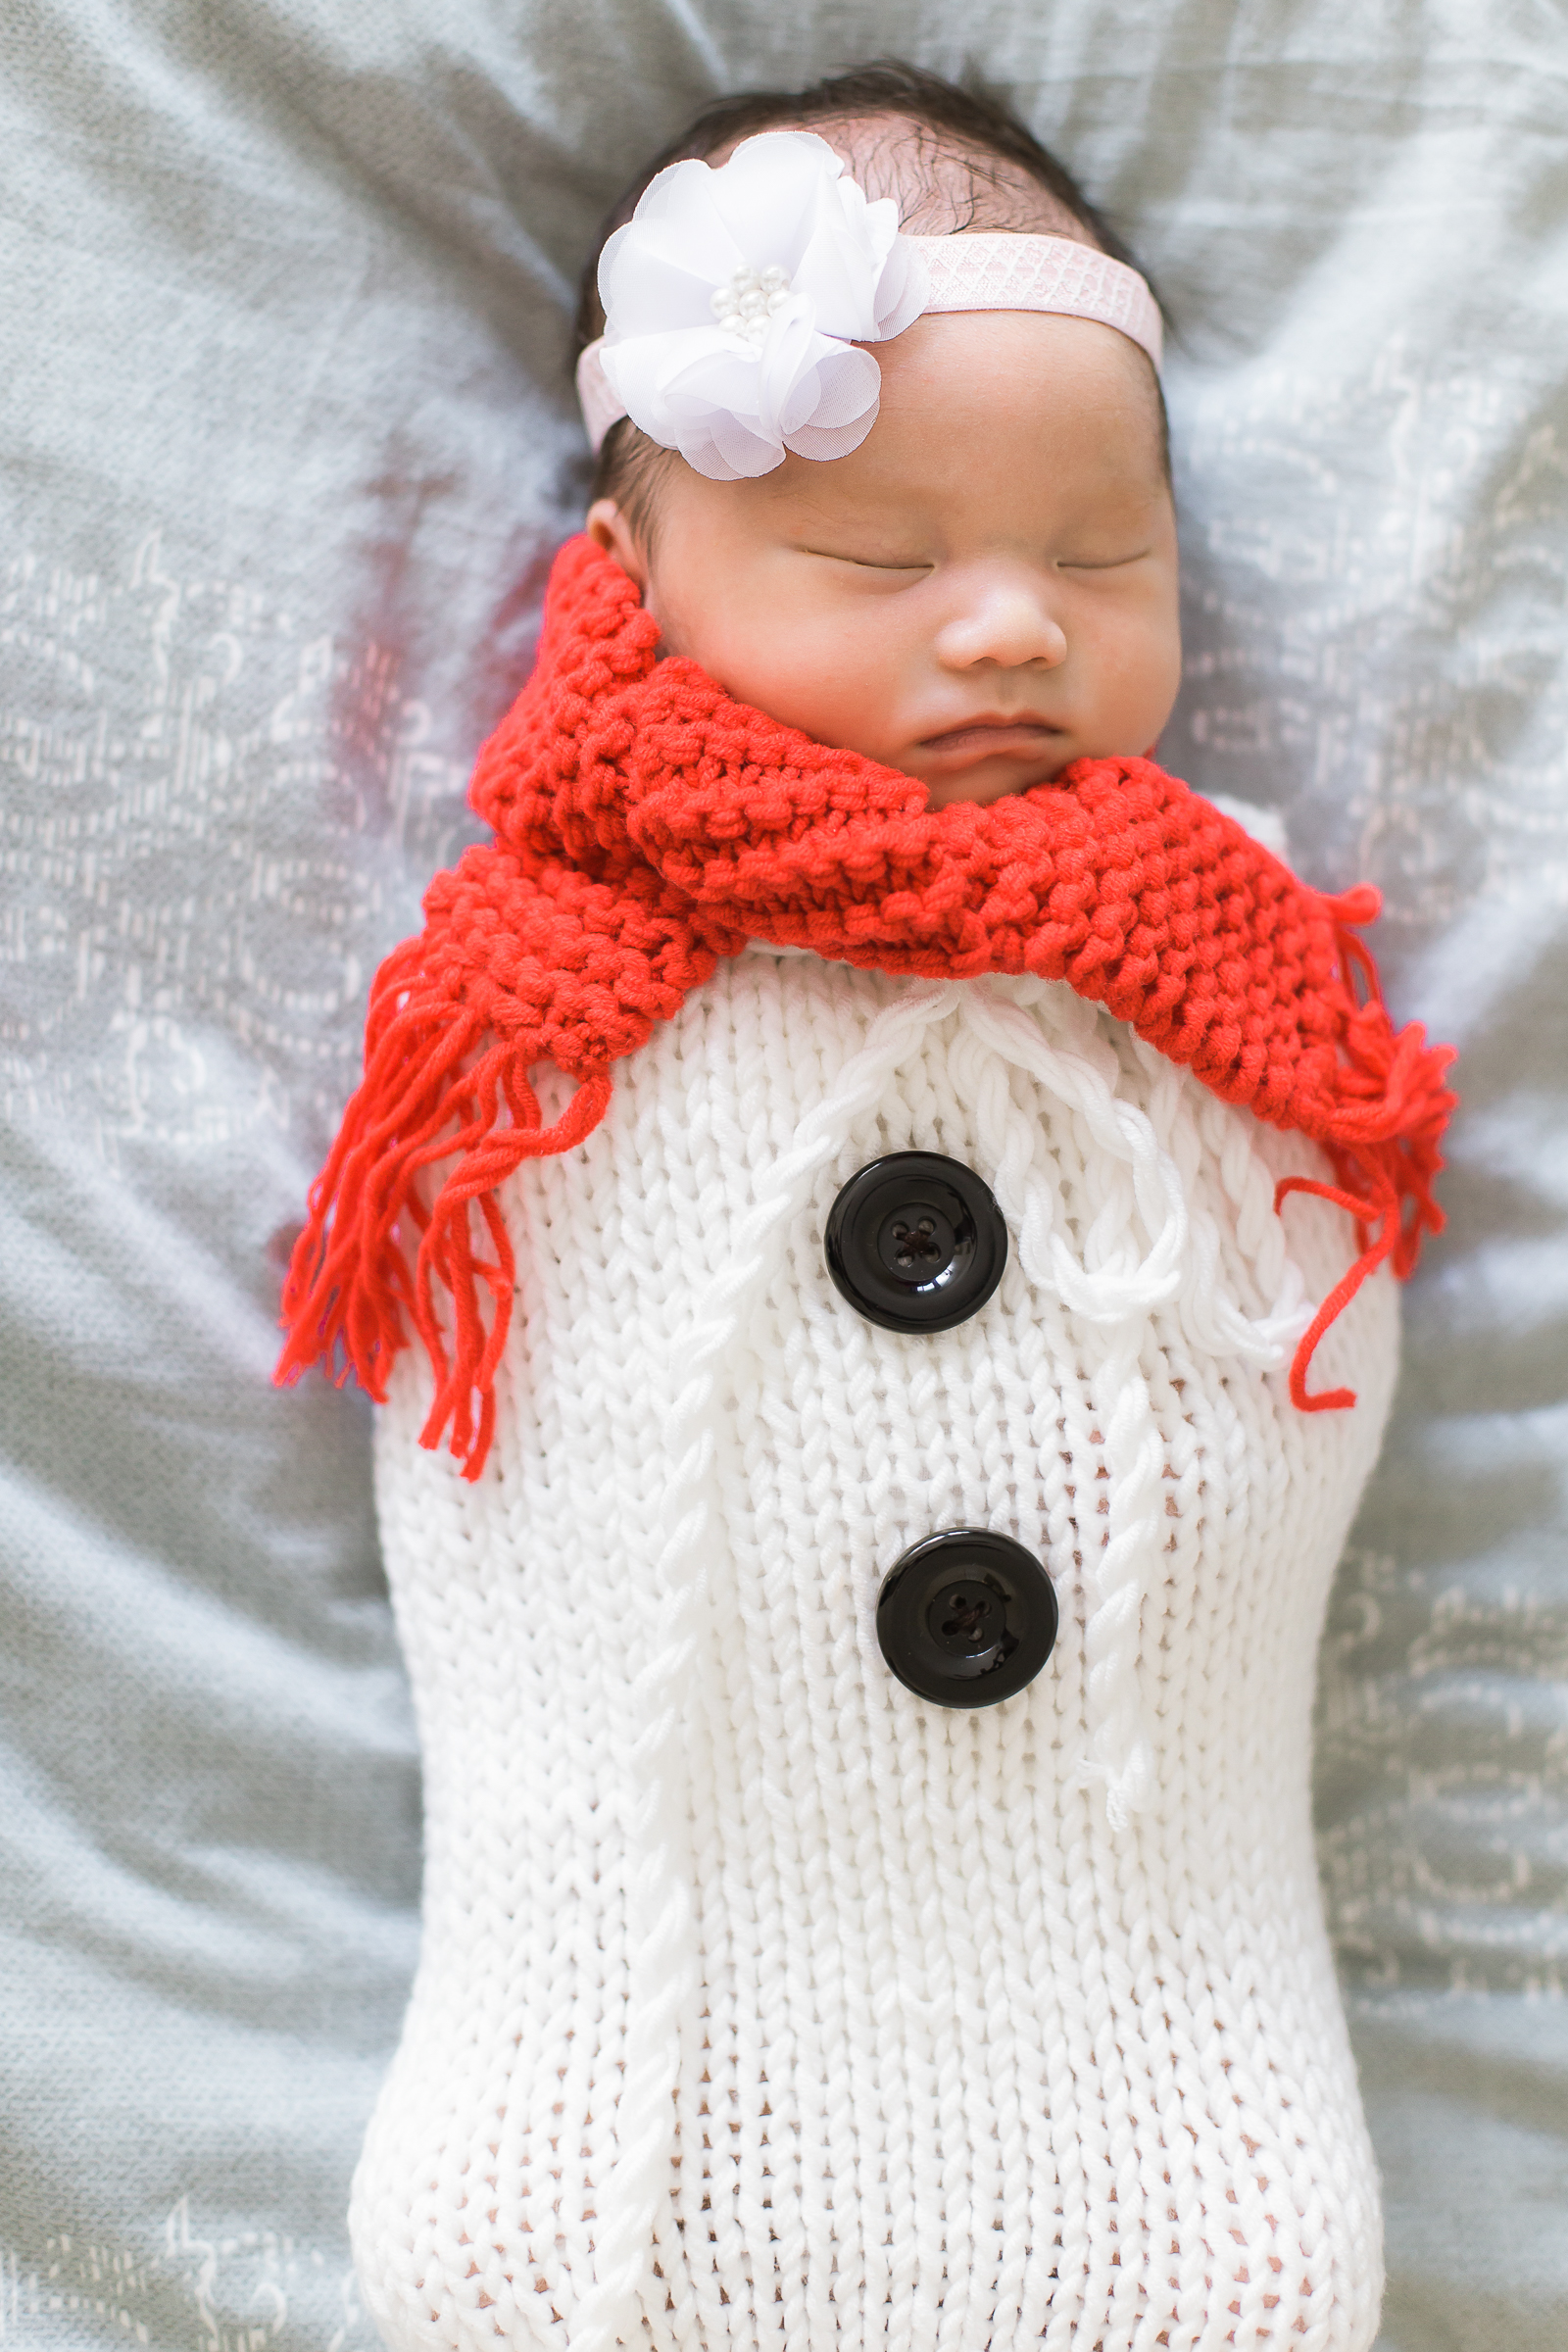 Baby sleeping in Christmas outfit